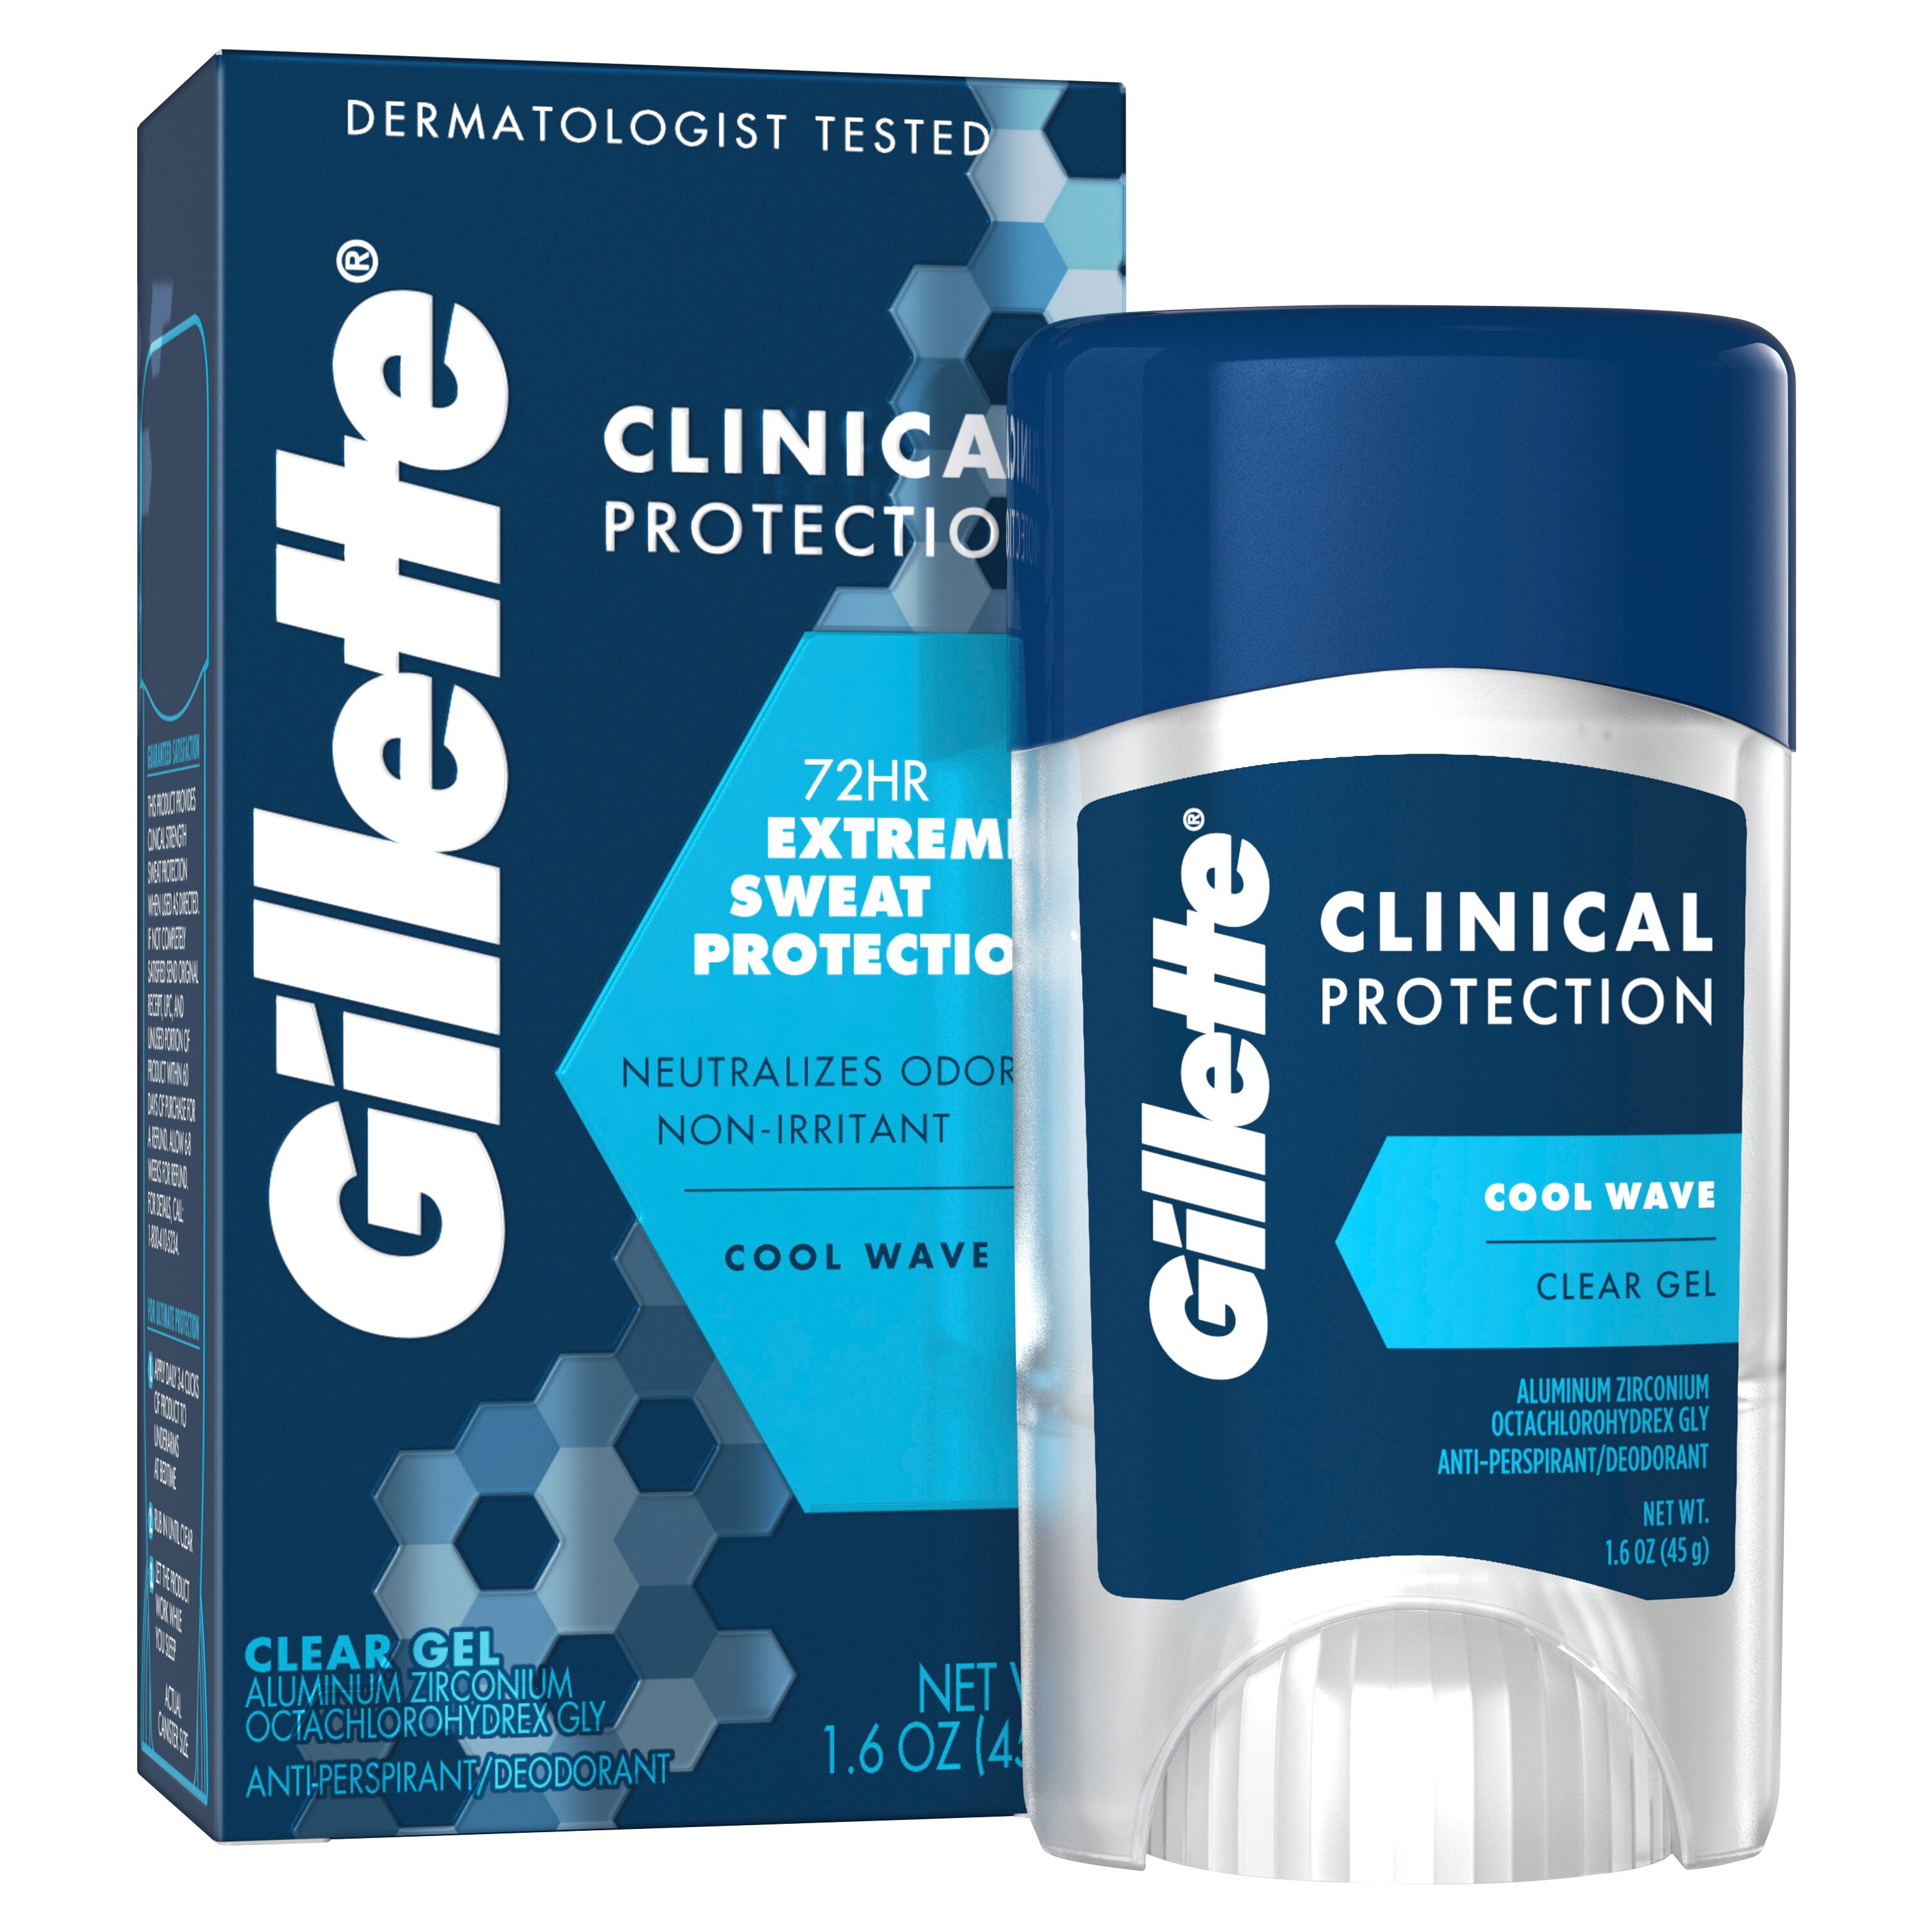 Gillette Clinical Clear Gel Anti-Perspirant and Deodorant, Cool Wave, 1.6 OZ